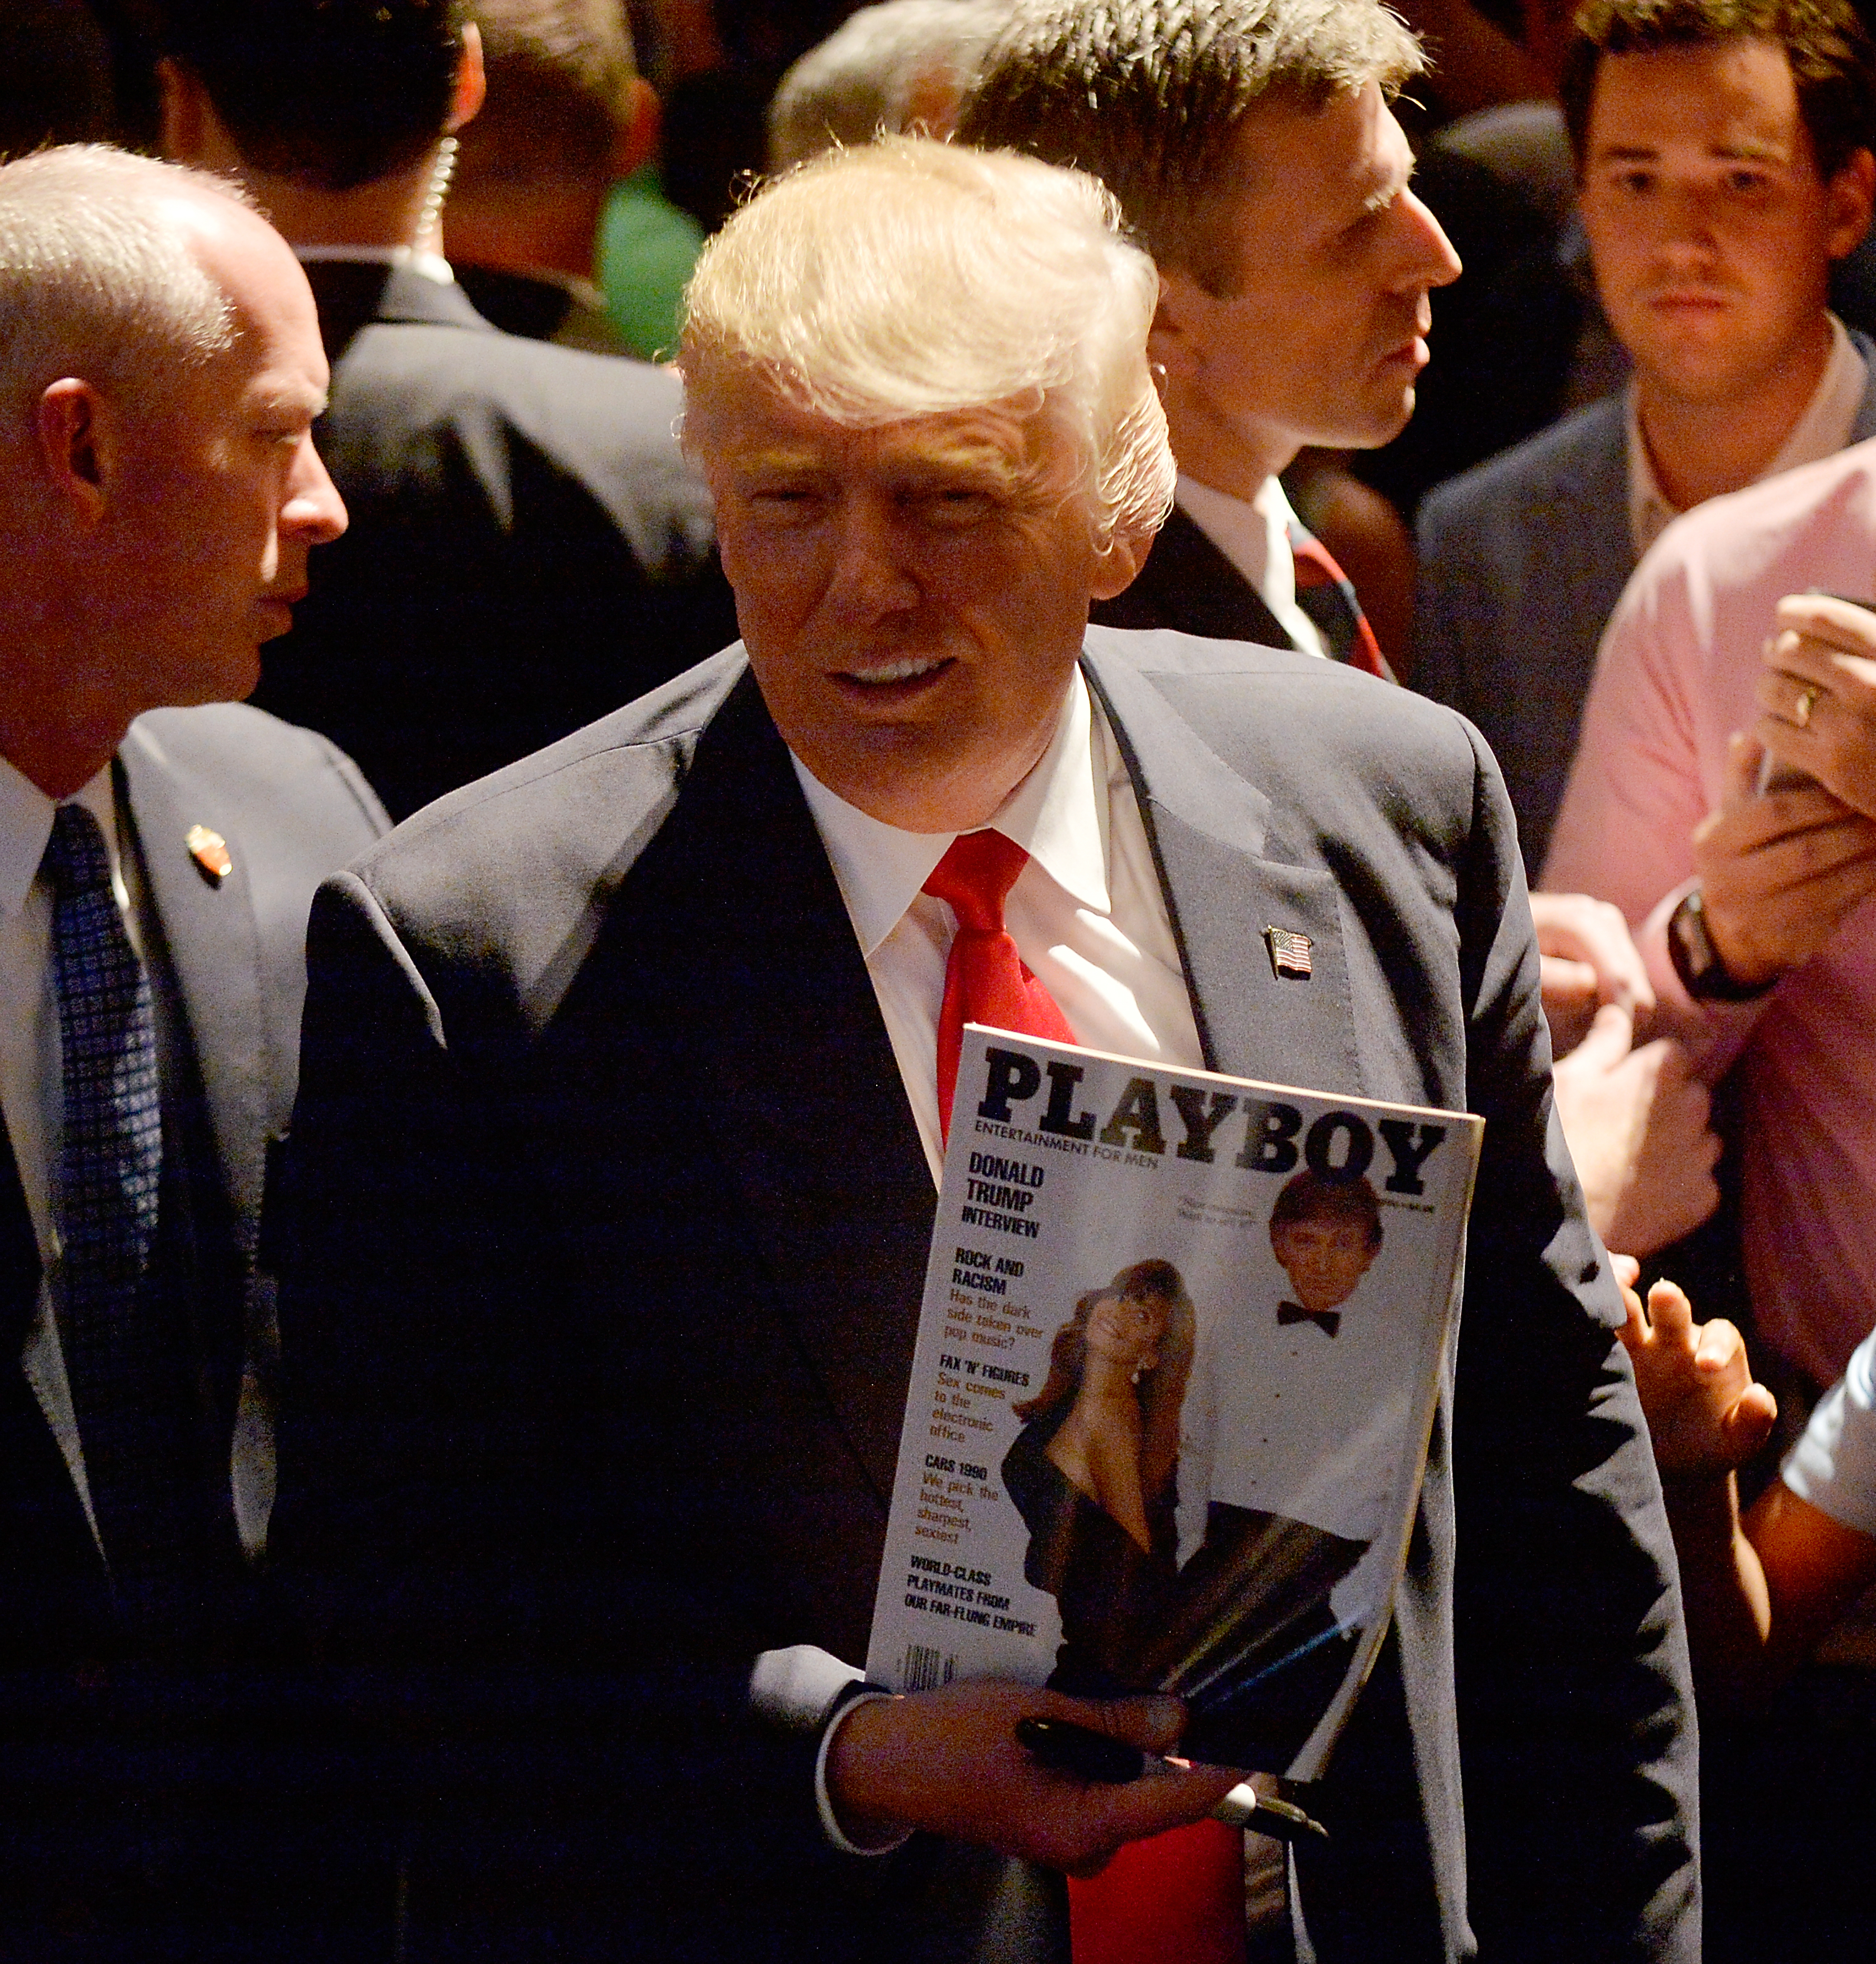 RALEIGH, NC - JULY 5:  Presumptive Republican presidential nominee Donald Trump shows a police officer his photo on the cover of a Playboy magazine during a campaign event at the Duke Energy Center for the Performing Arts  on July 5, 2016 in Raleigh, North Carolina. Earlier in the day Hillary Clinton campaigned in Charlotte, North Carolina with President Barack Obama. (Photo by Sara D. Davis/Getty Images) (Getty Images. Donald Trump on the campaign trail in 2016)